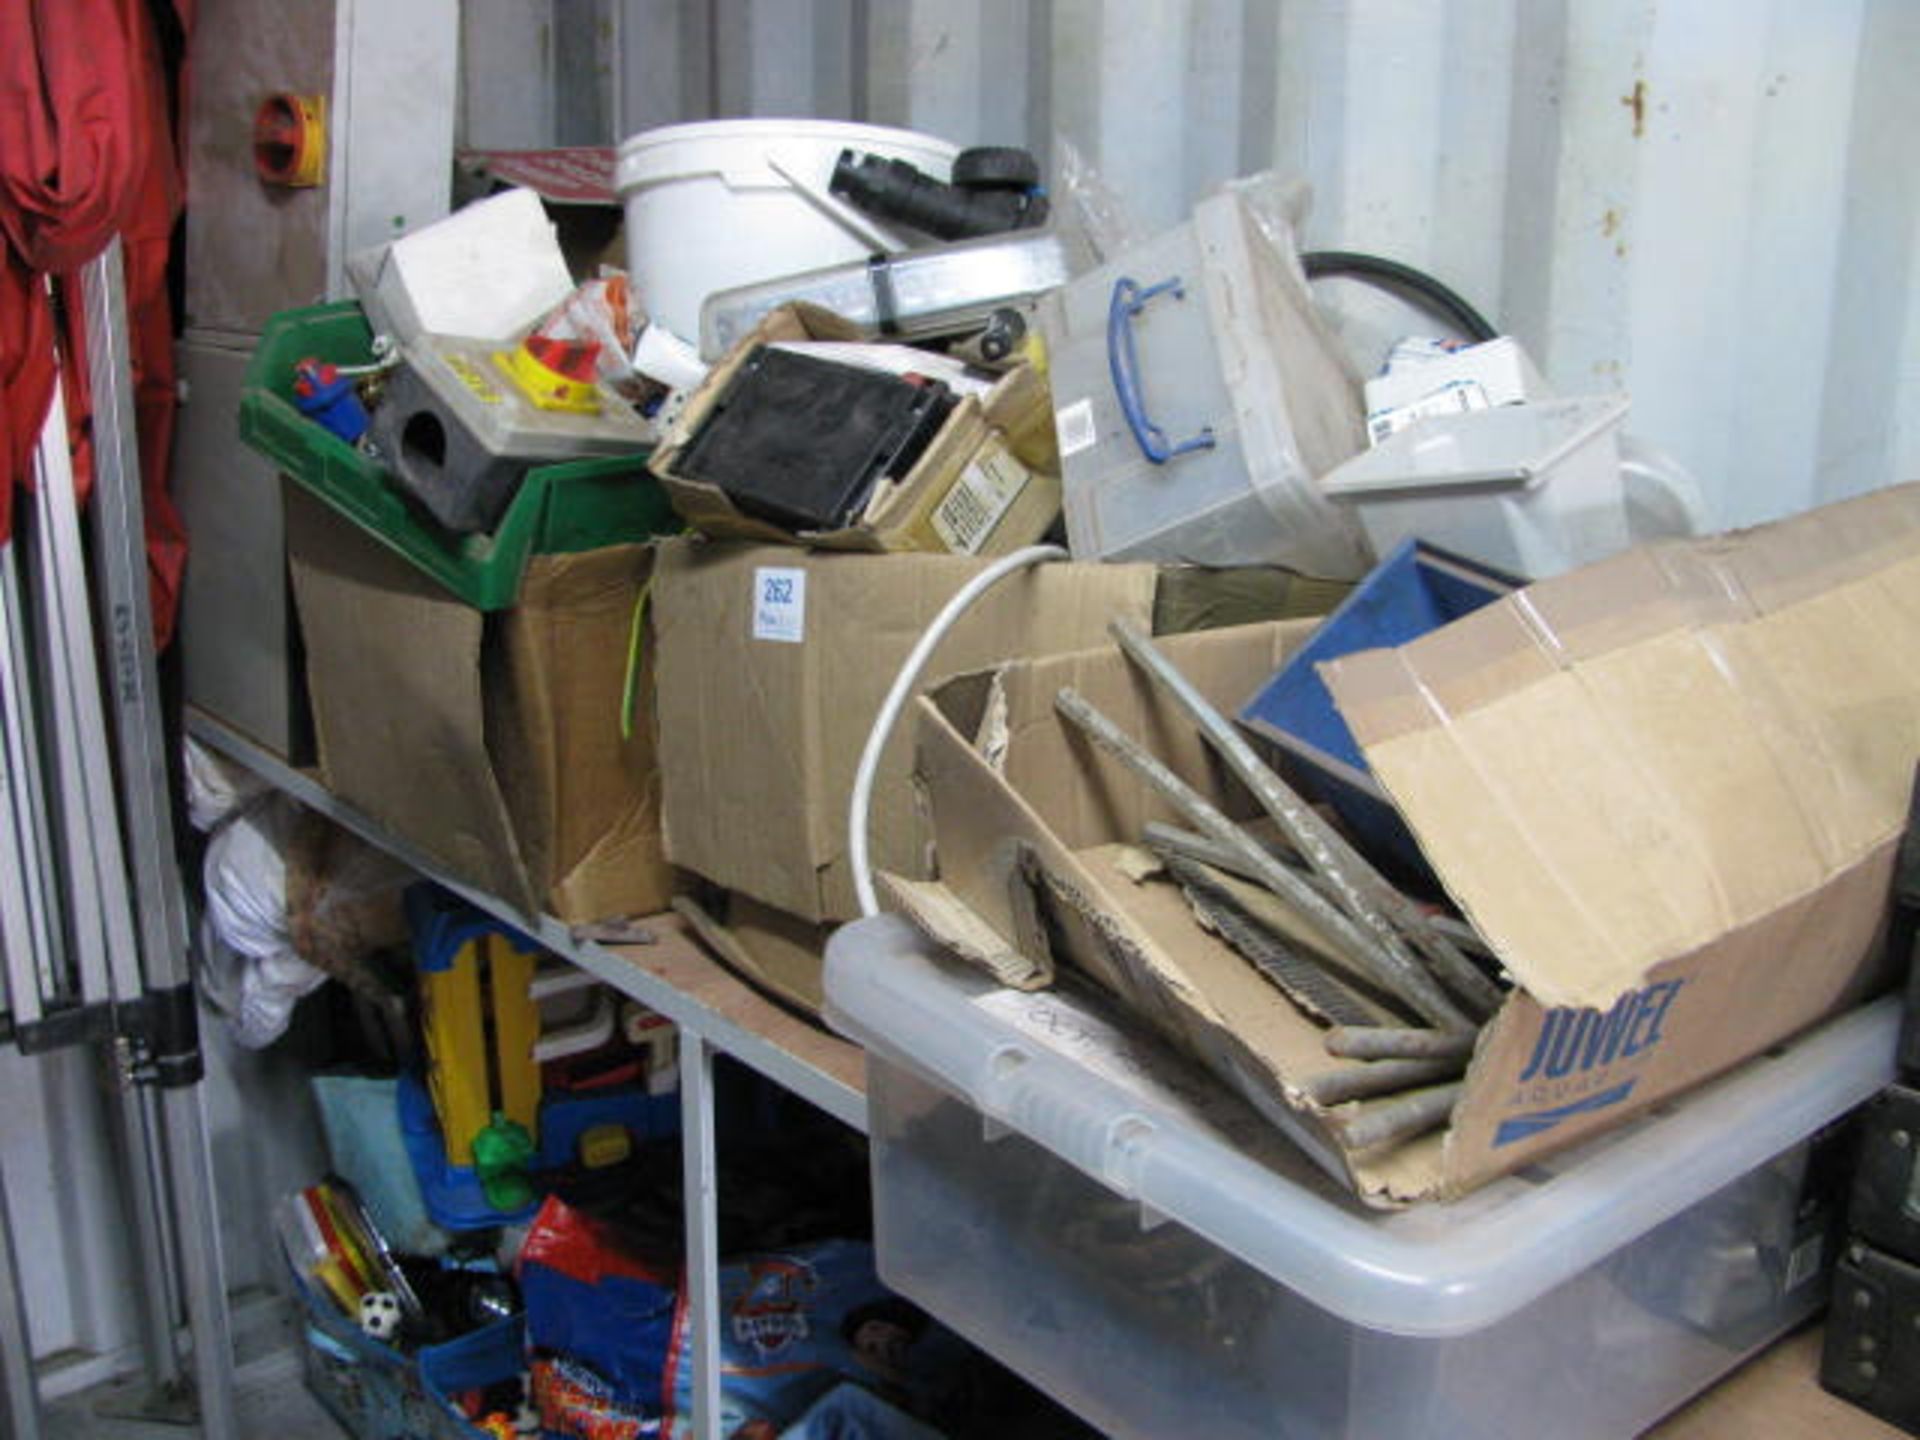 (6) Boxes of miscellaneous fittings and consumables